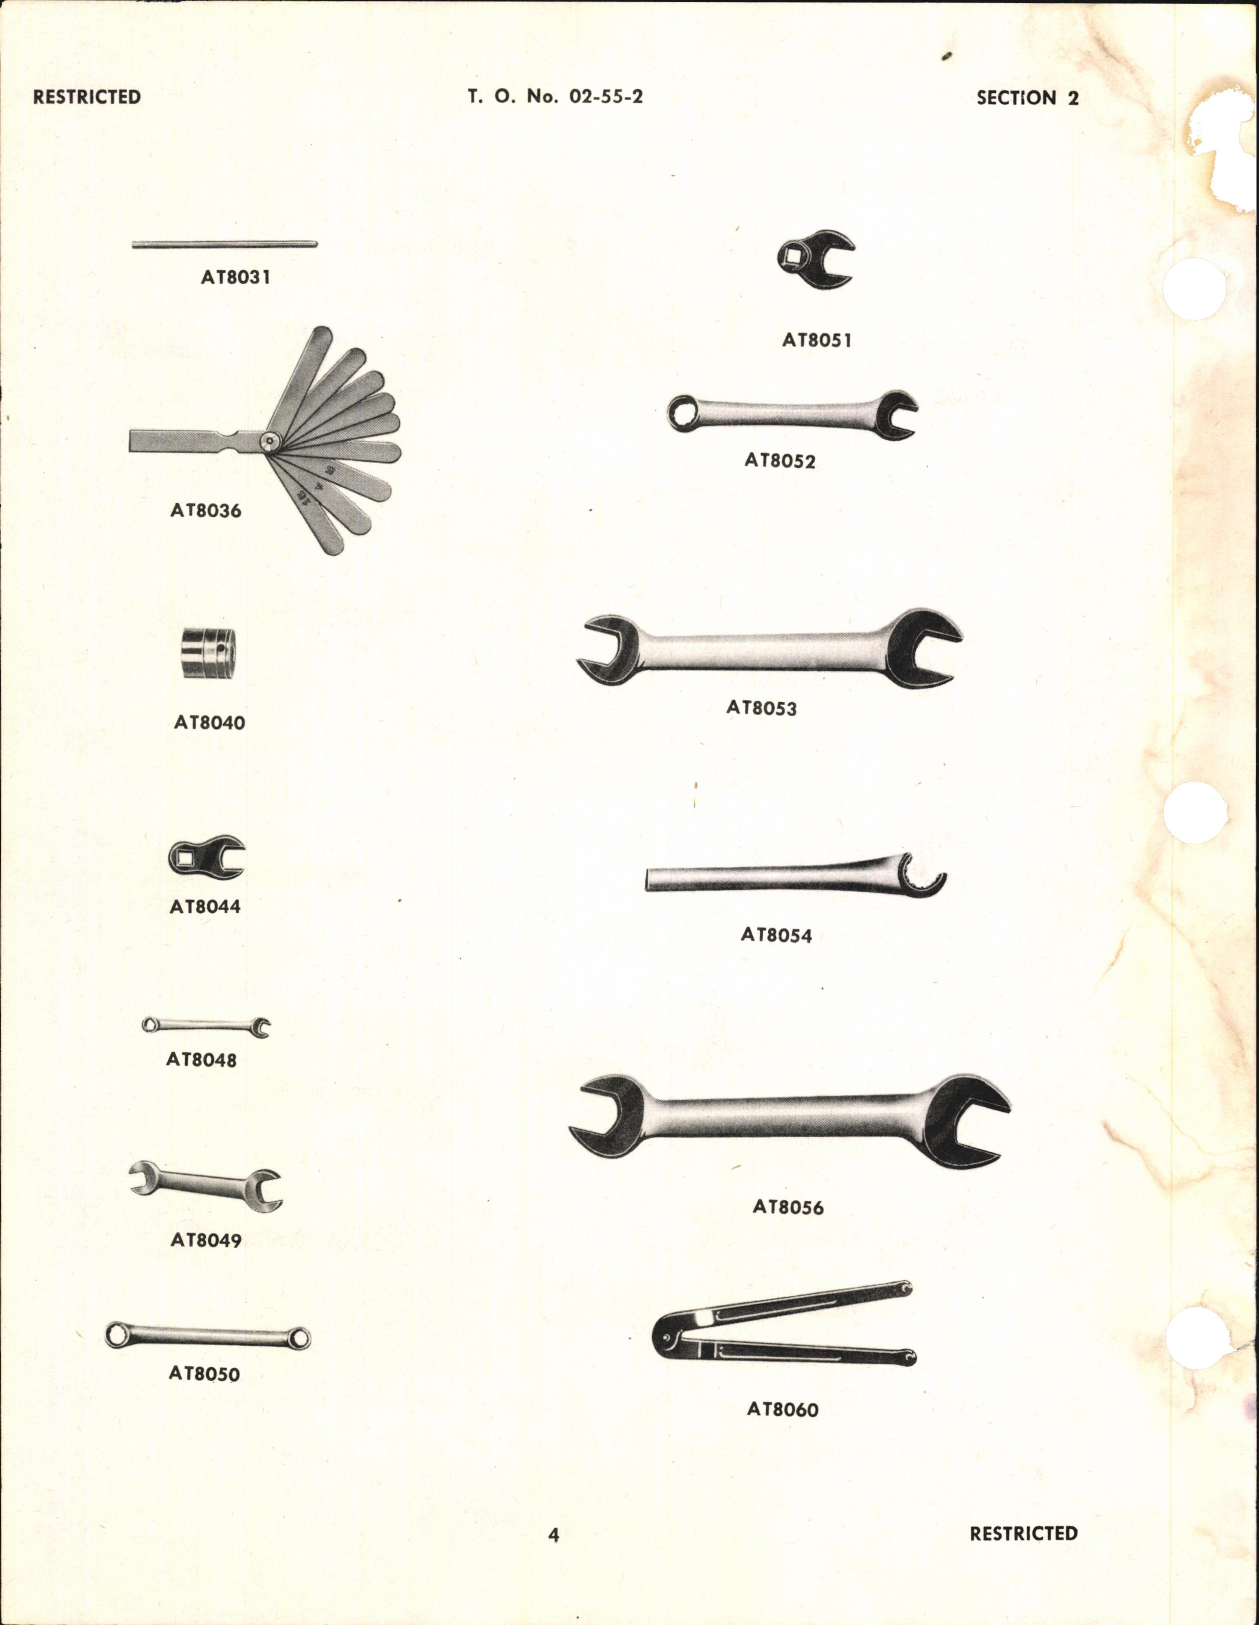 Sample page 6 from AirCorps Library document: Service Tool Catalog for Rolls-Royce Aircraft Engines